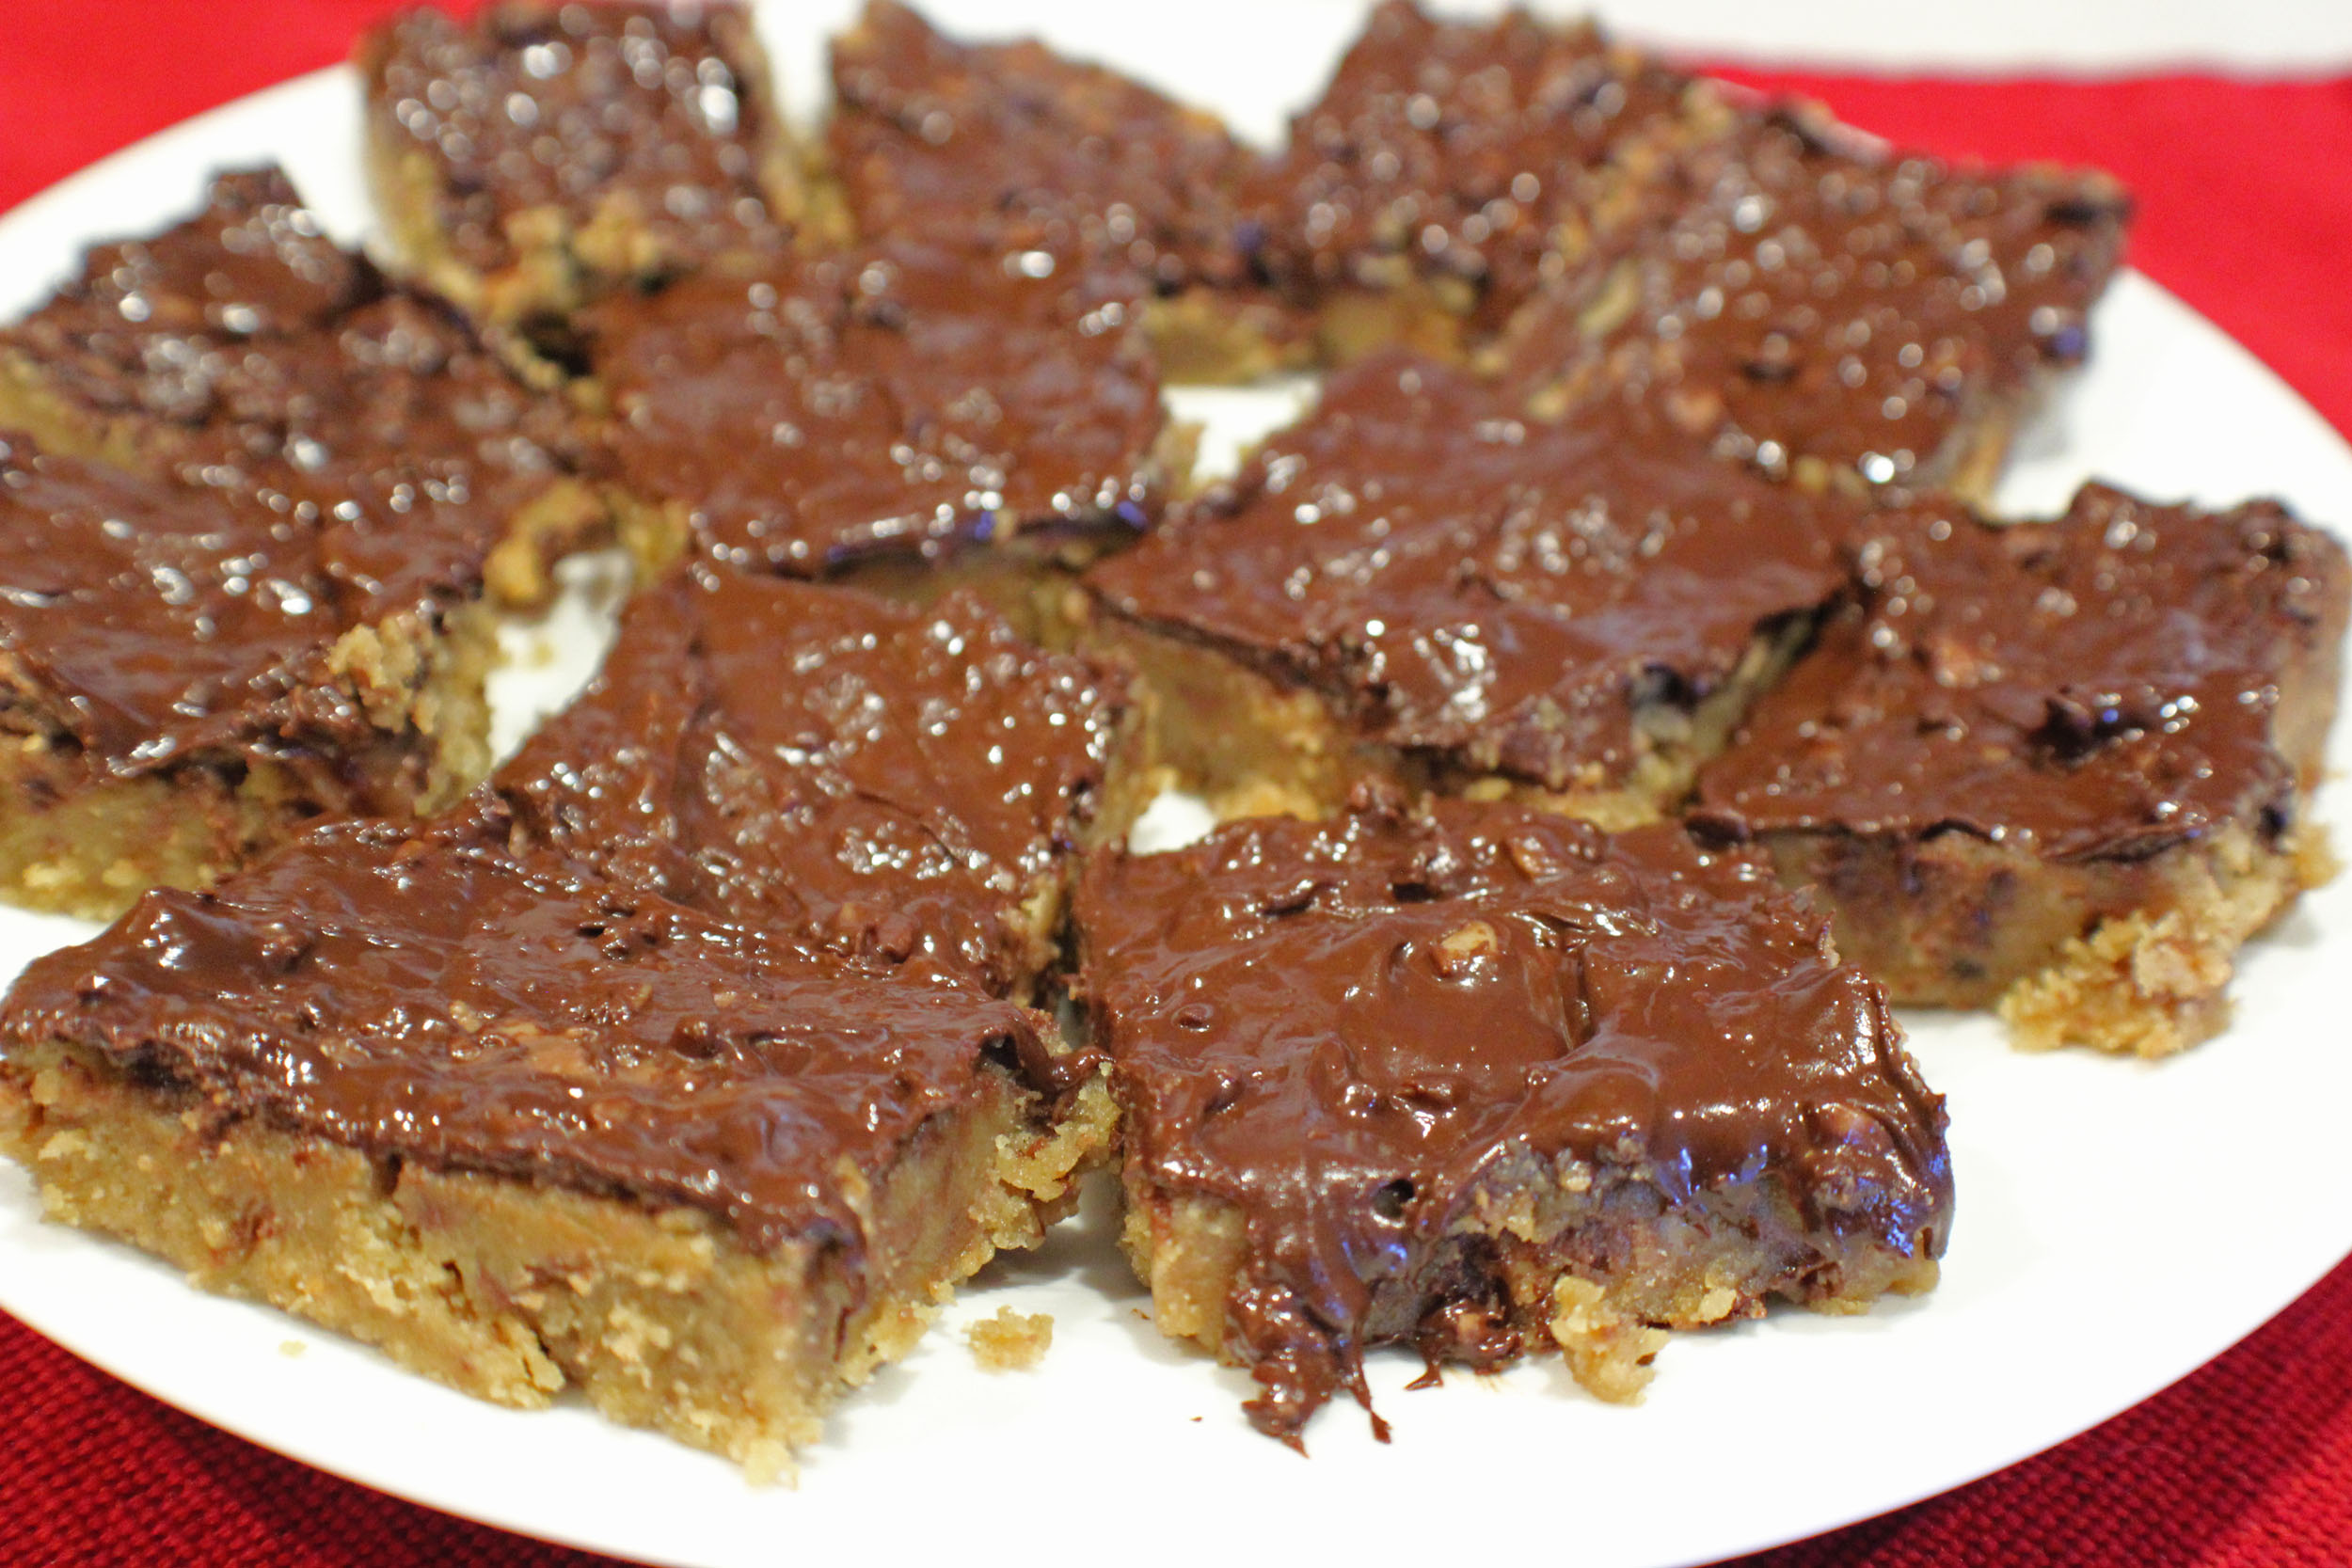 Toffee Bars